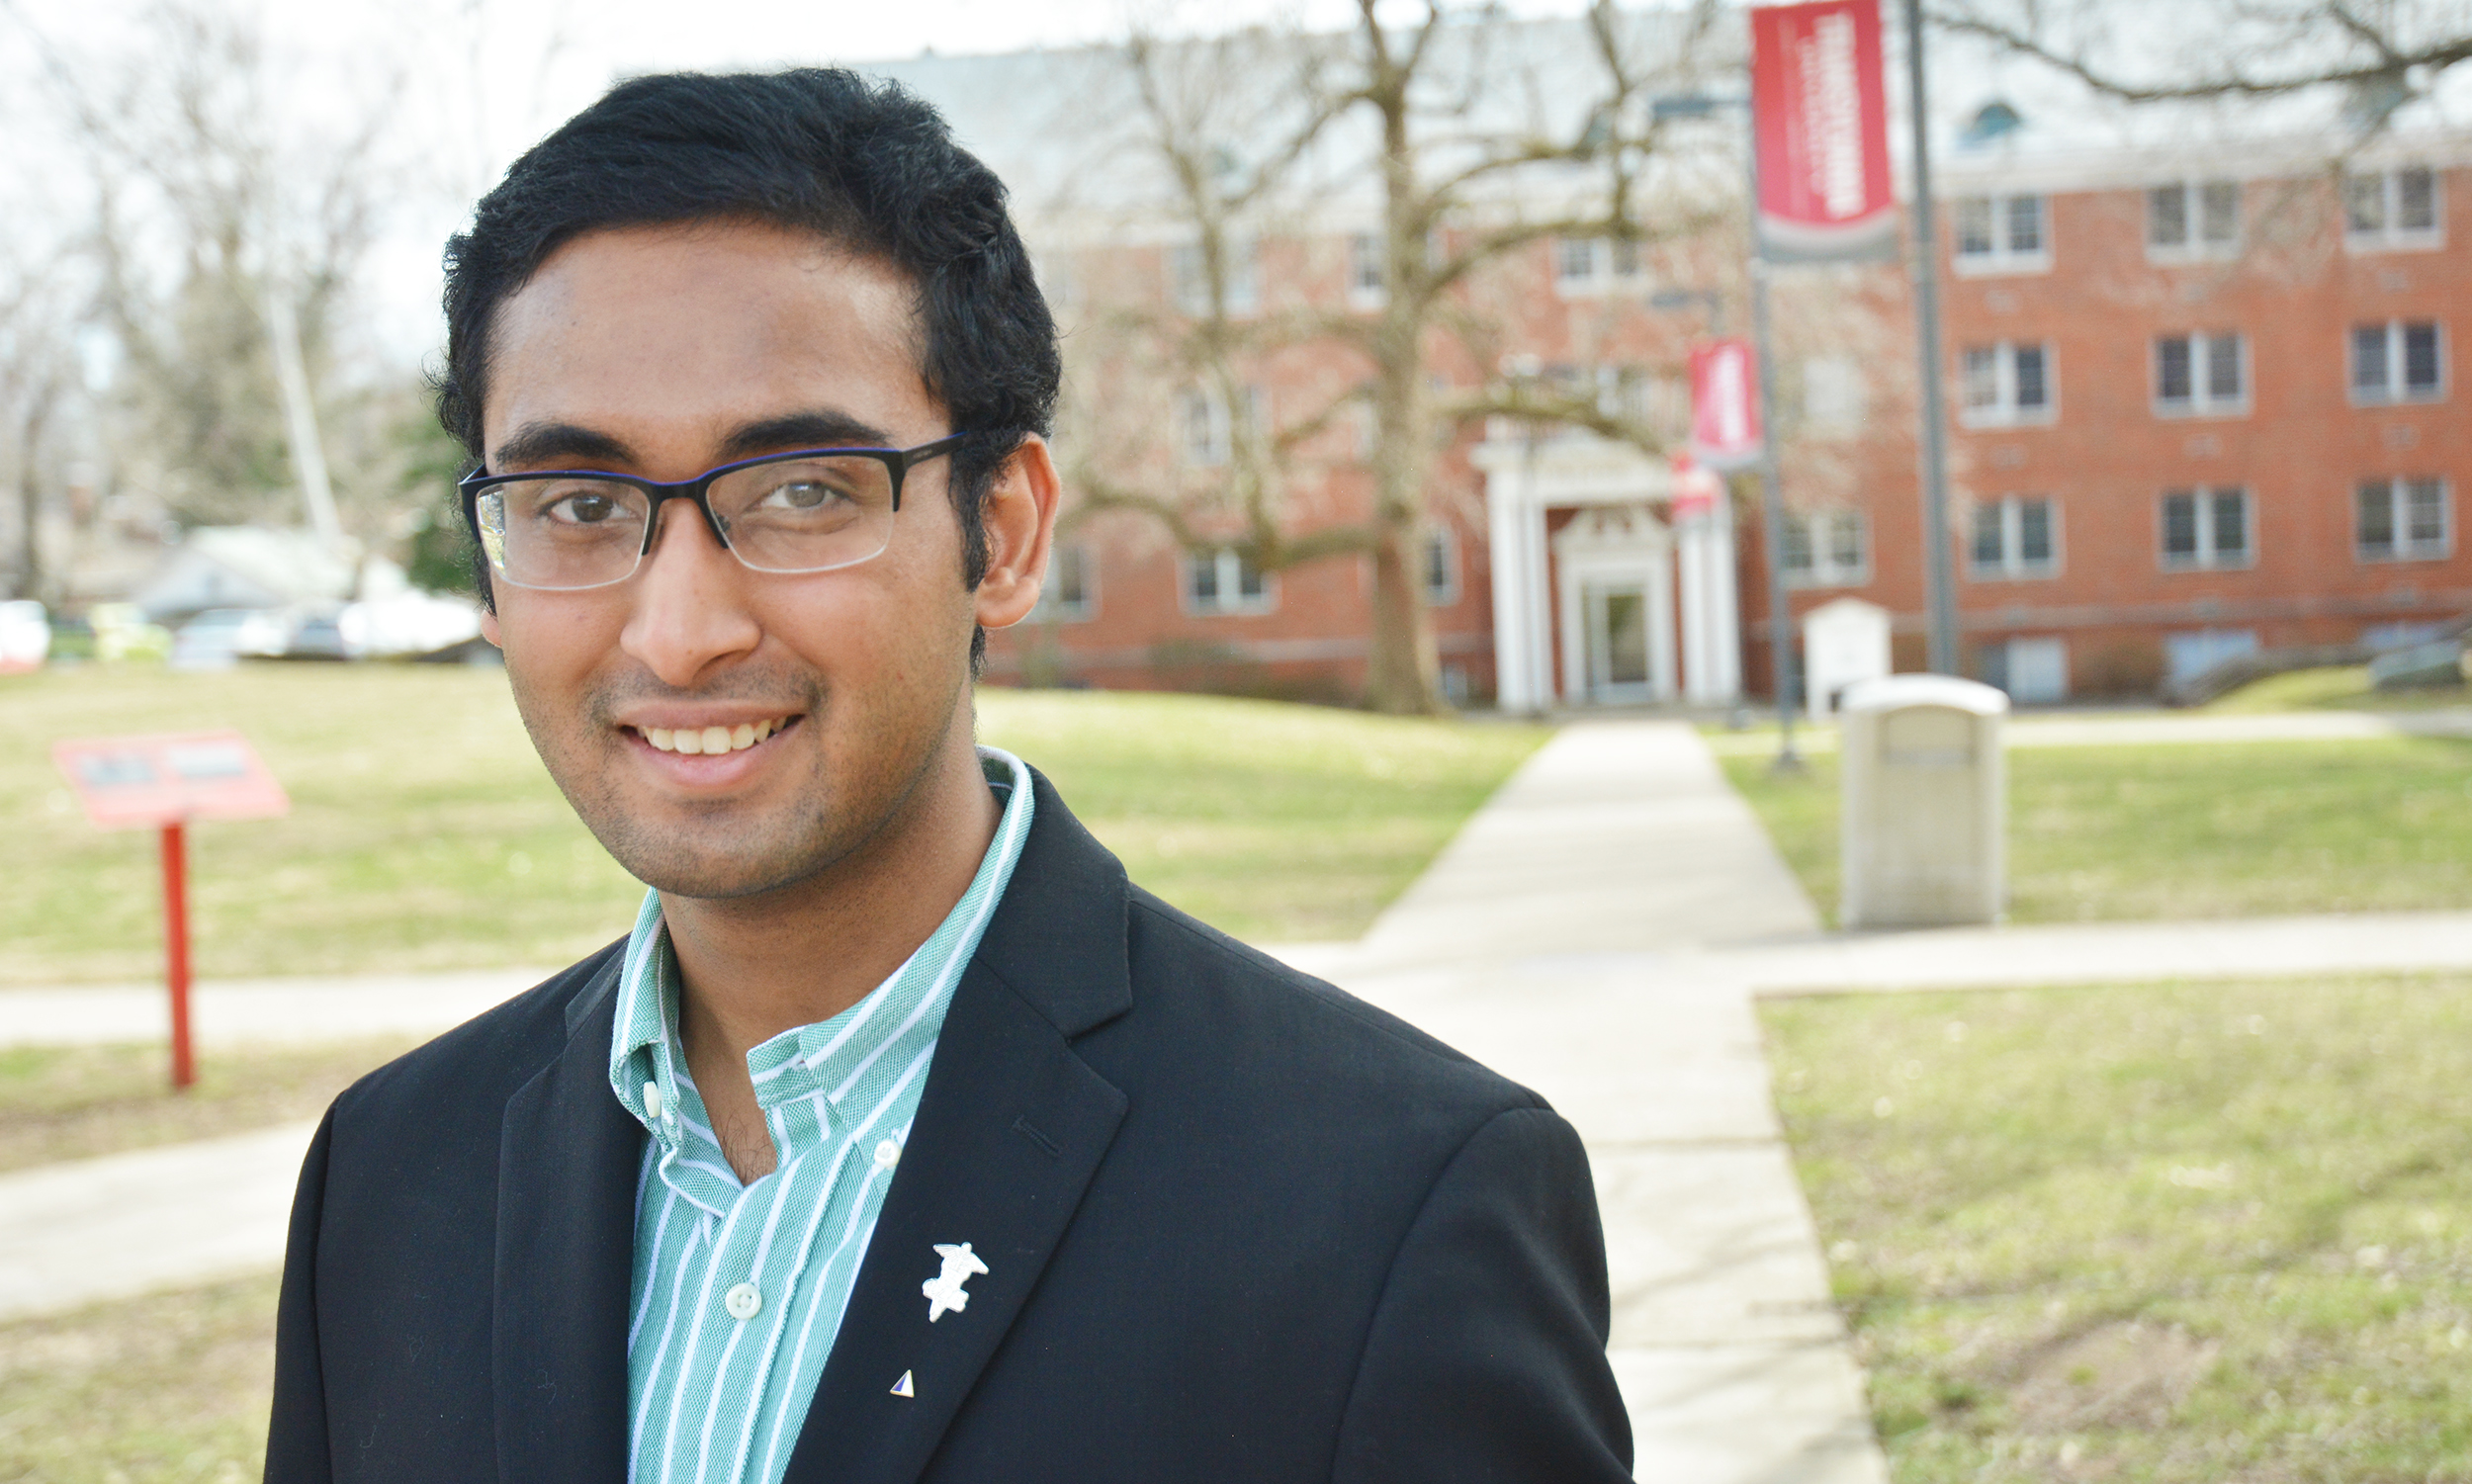 From quantum dots to Pioneer Pathway, Sameer Ahmed ’21 always connecting to next right thing